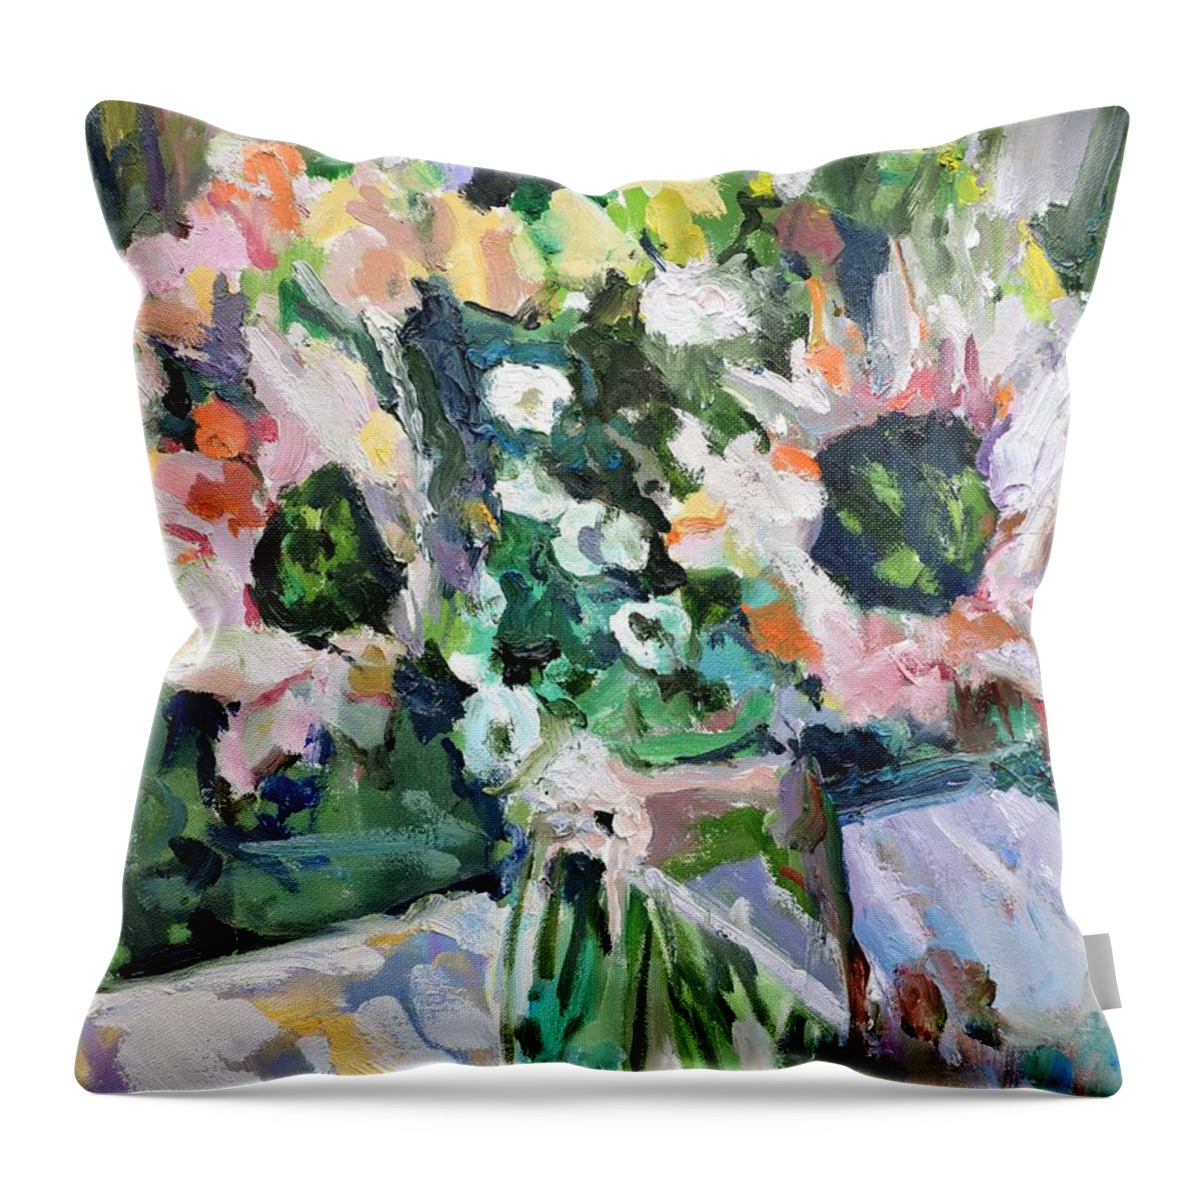 Green Throw Pillow featuring the painting I Wanna Make You Happy Oil Painting by Donna Tuten